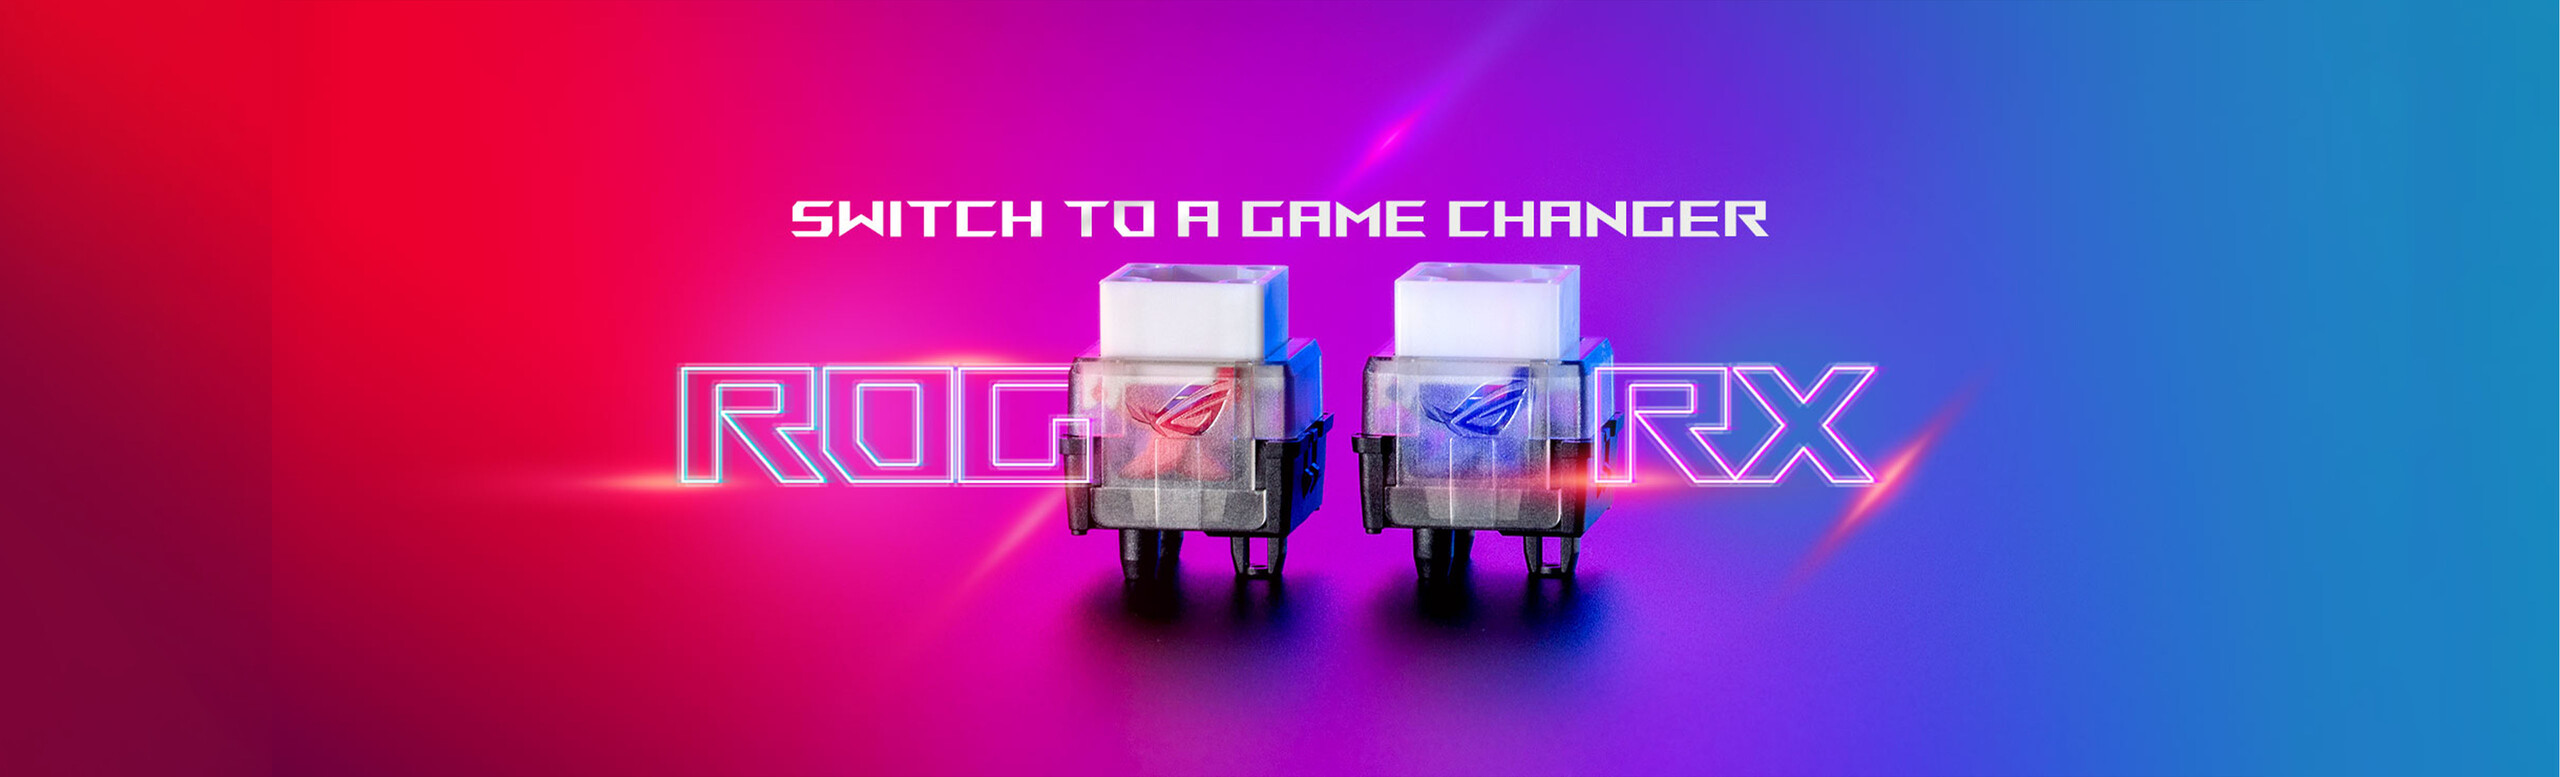 Learn more about ROG Switches